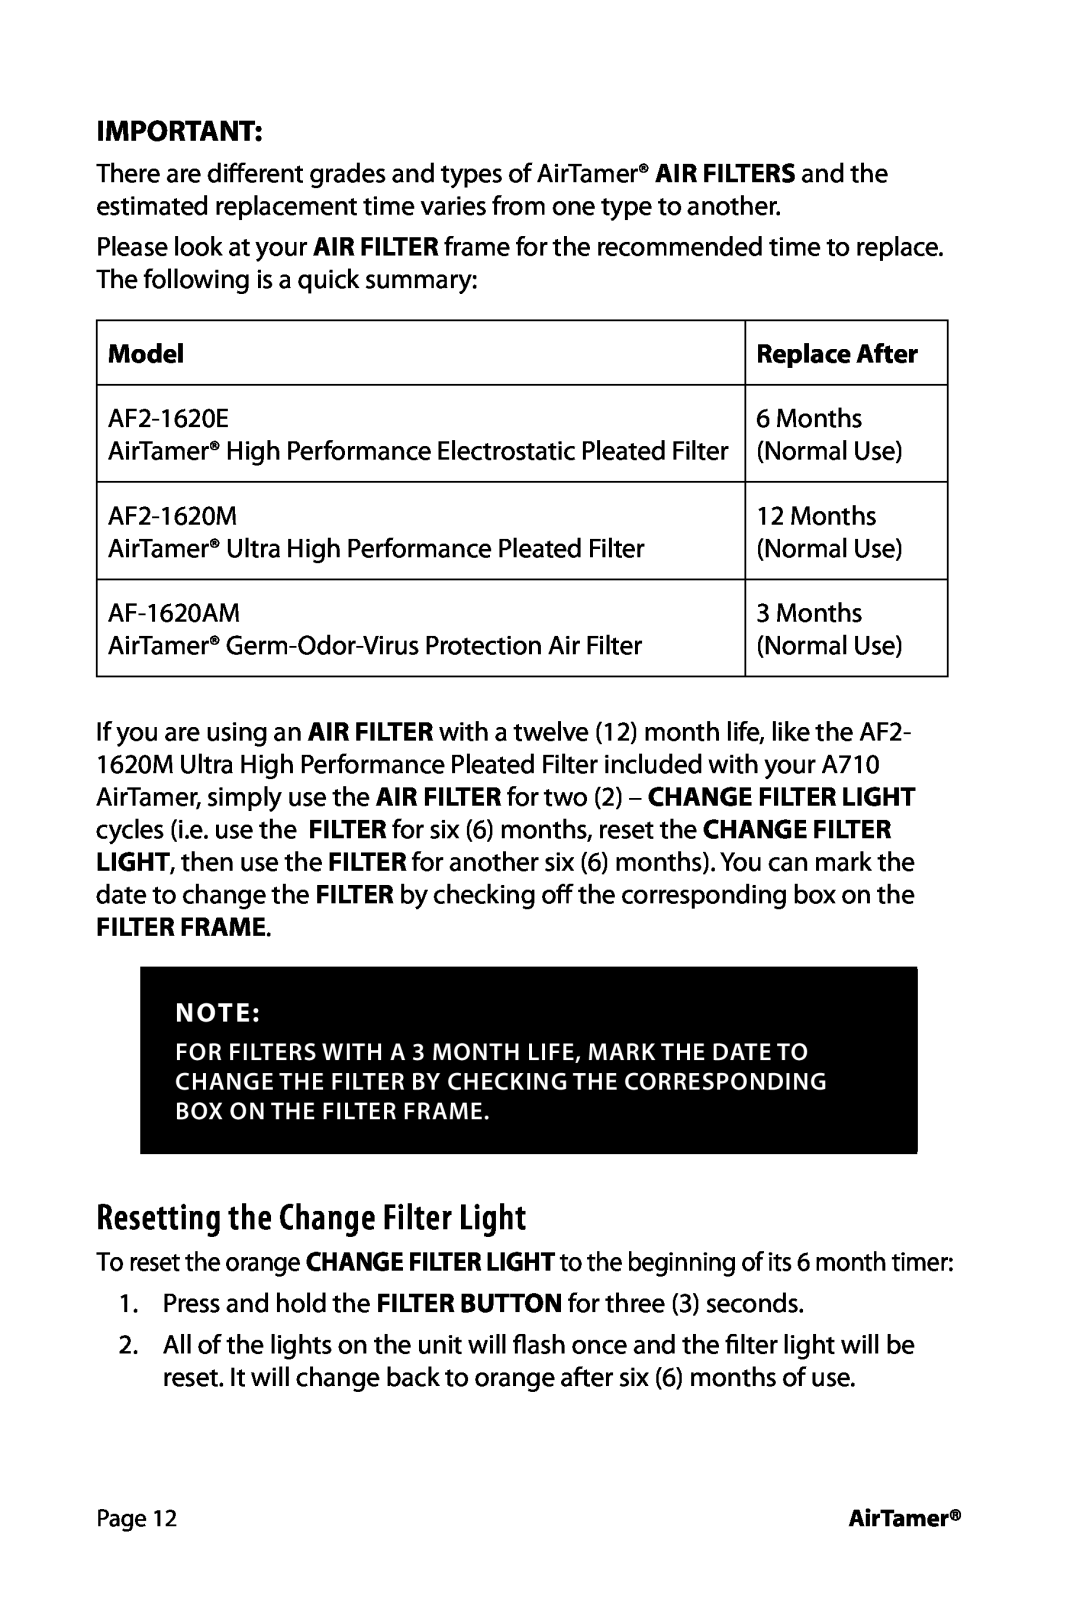 FilterStream HW_A710 instruction manual Resetting the Change Filter Light, Model, Replace After, Filter Frame 